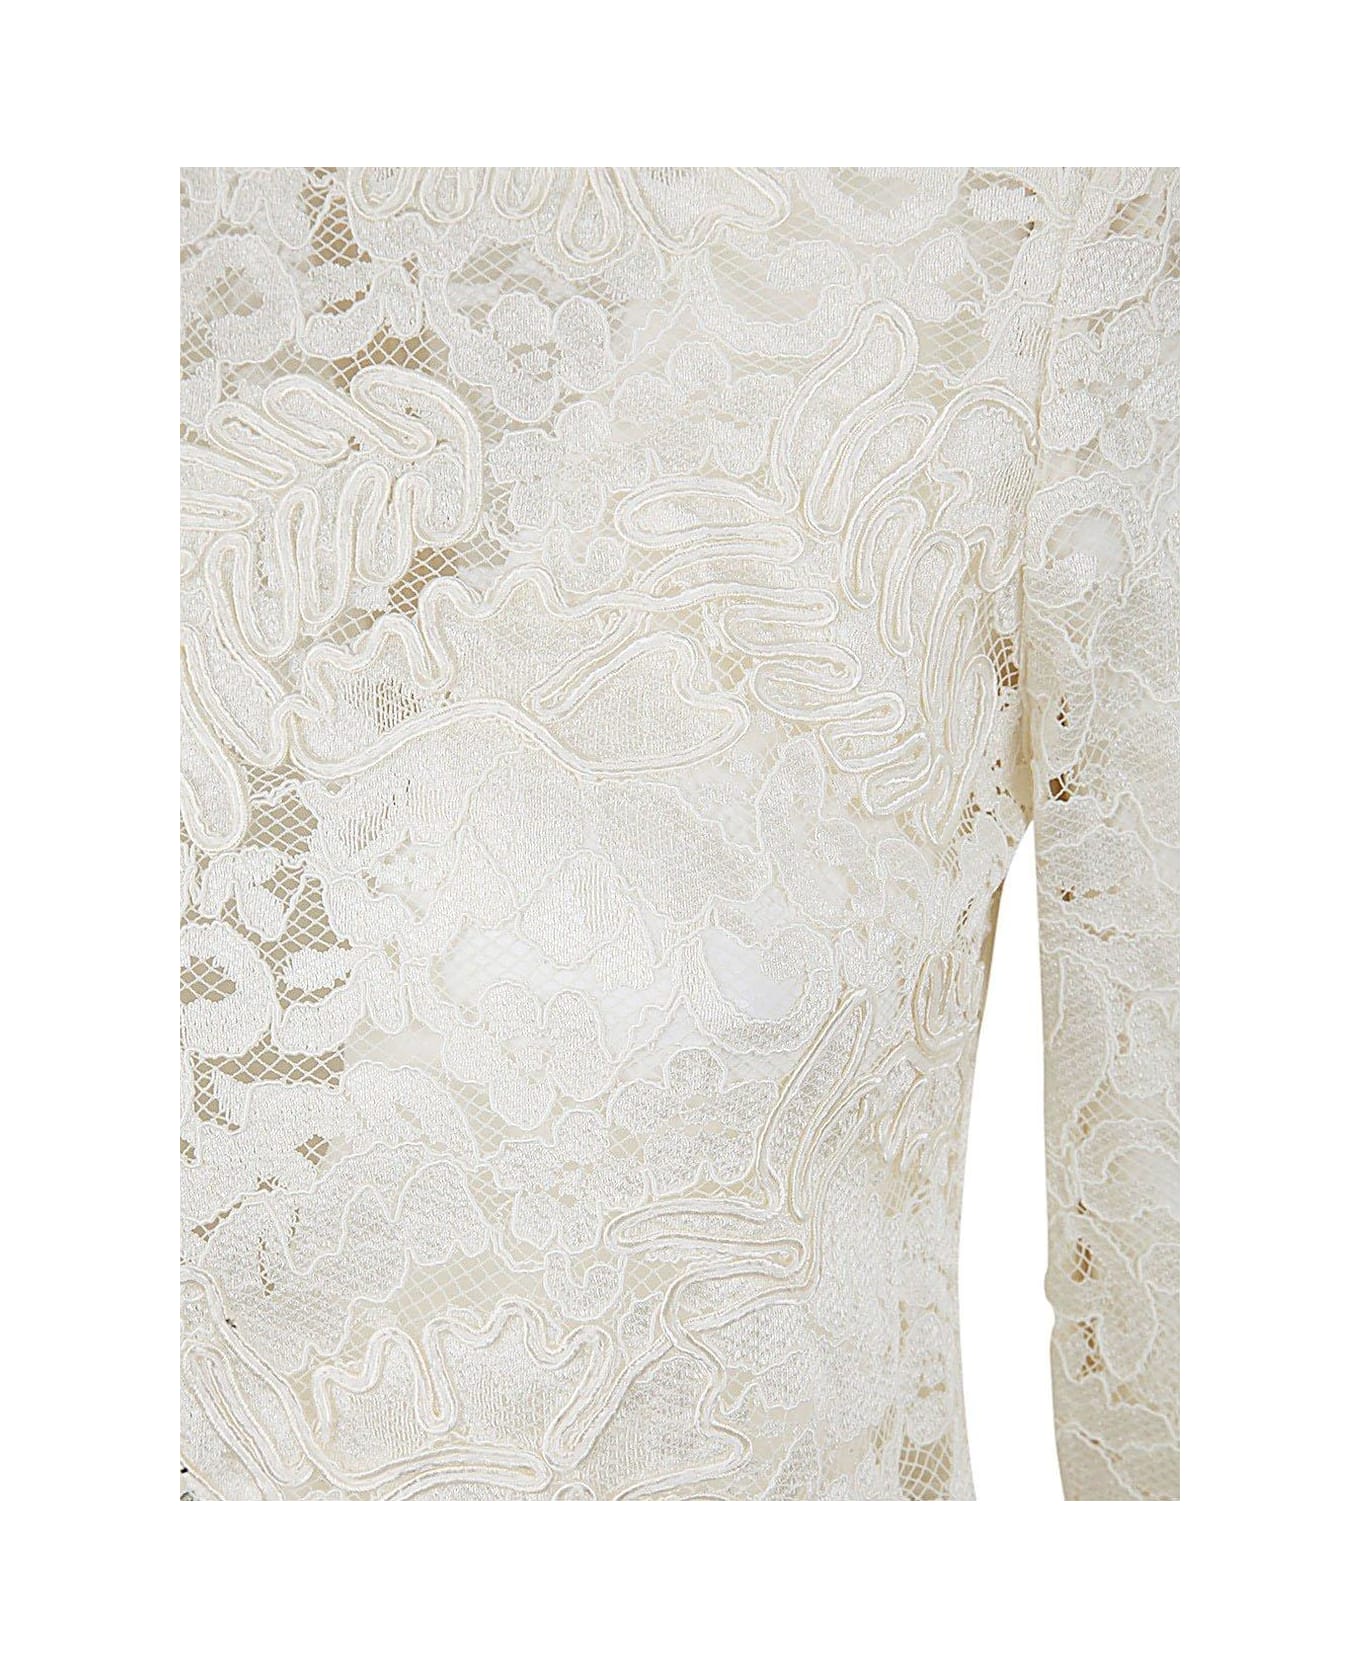 self-portrait Lace-detailed Long-sleeved Top - Cream